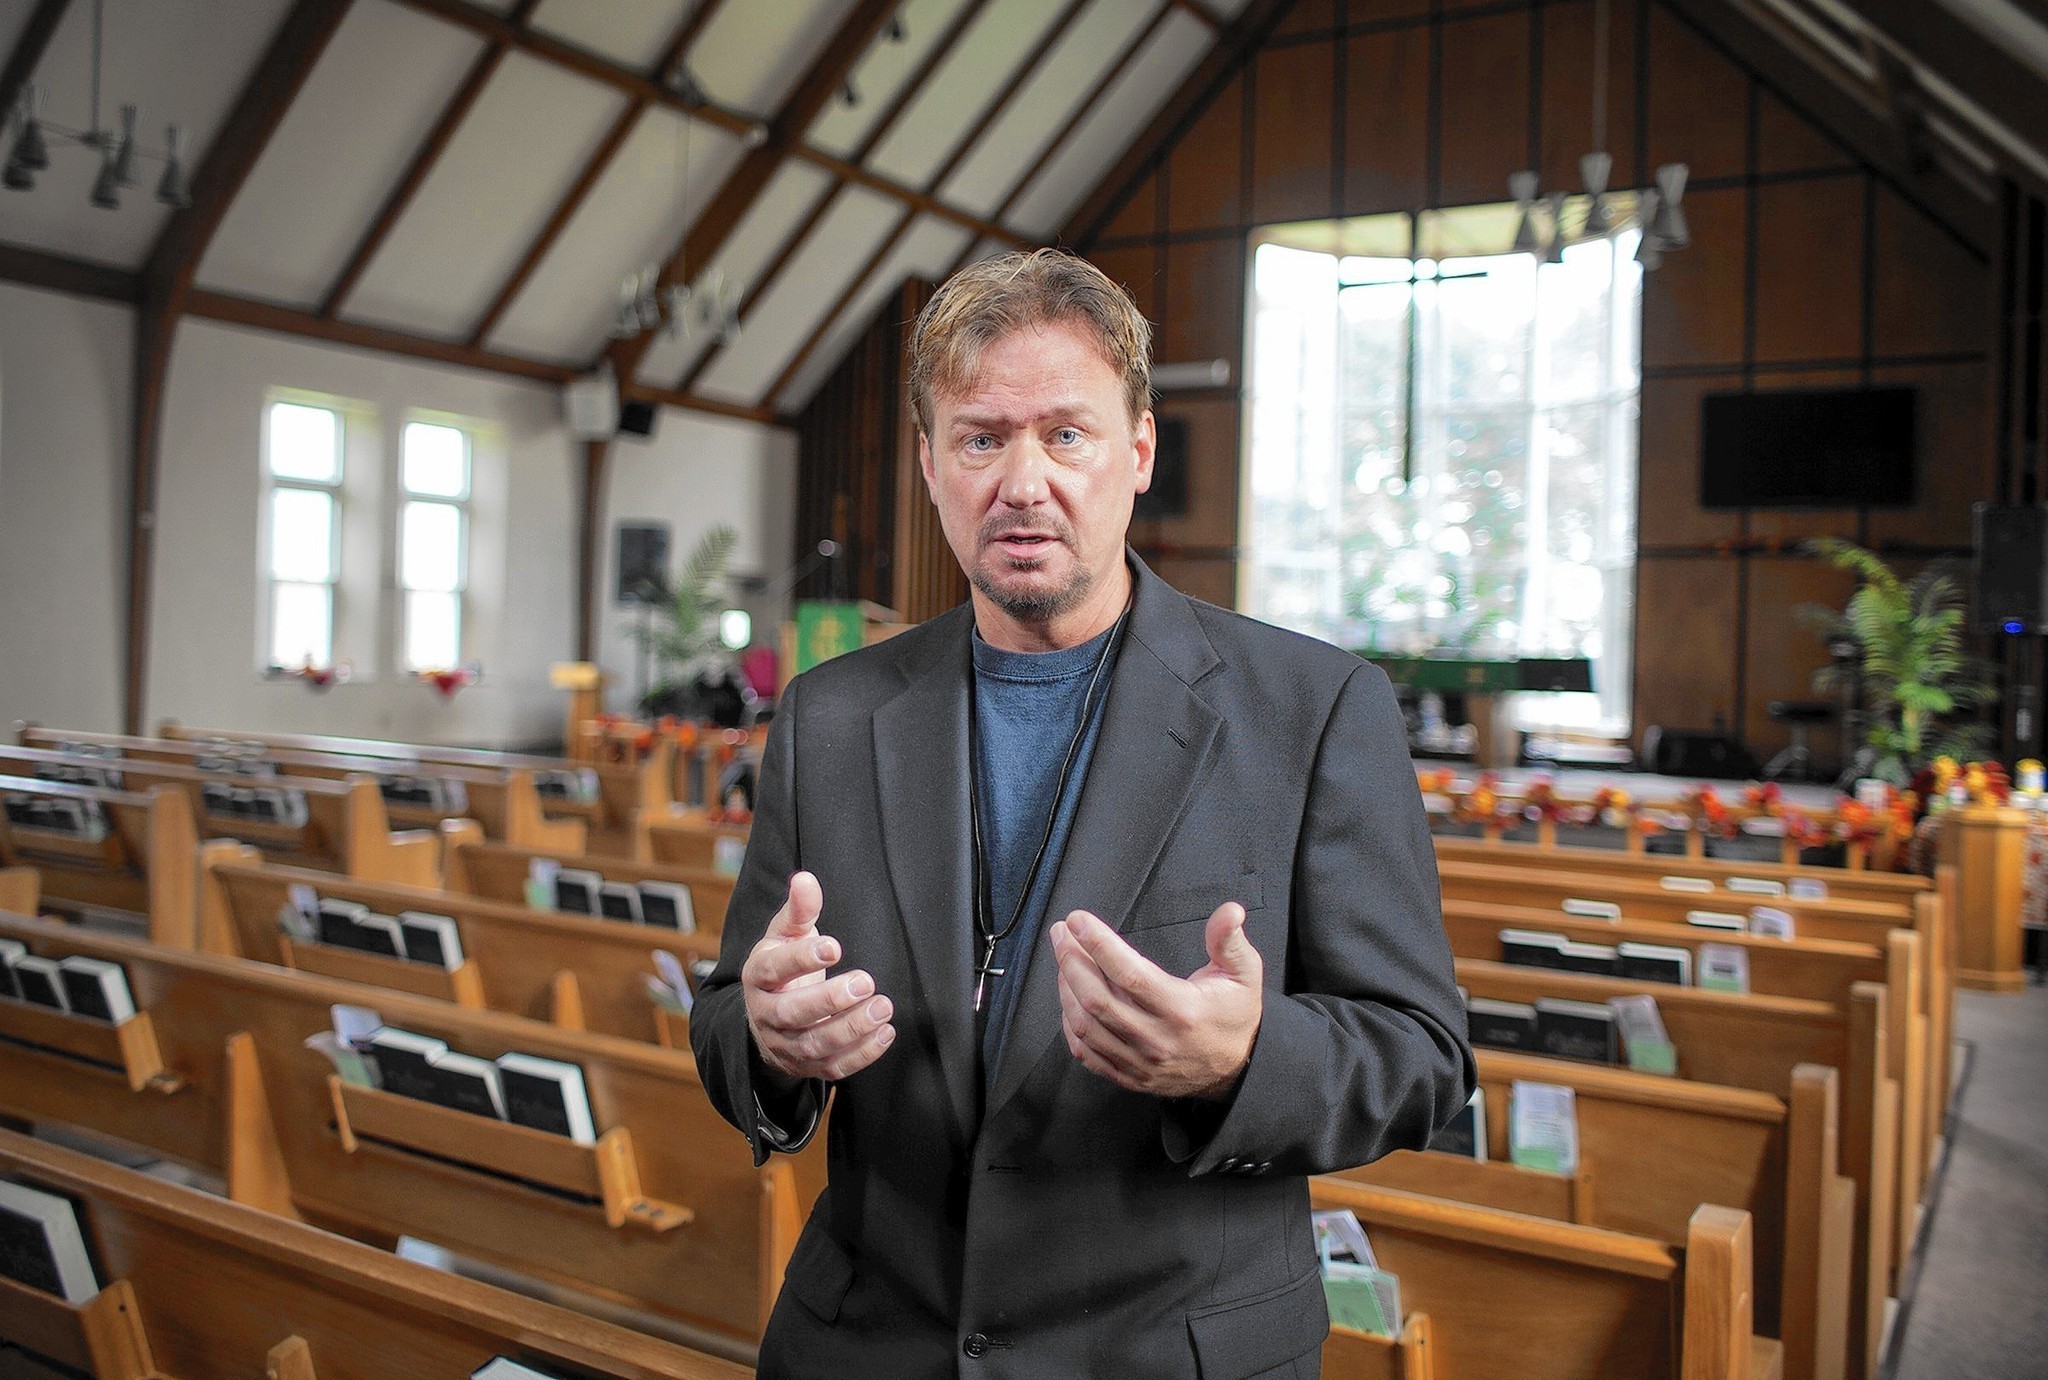 The Rev. Frank Schaefer, pictured in his church's sanctuary on Oct. 17, 2013 in Lebanon, Pennsylvania, is facing a church trial on November 18, 2013